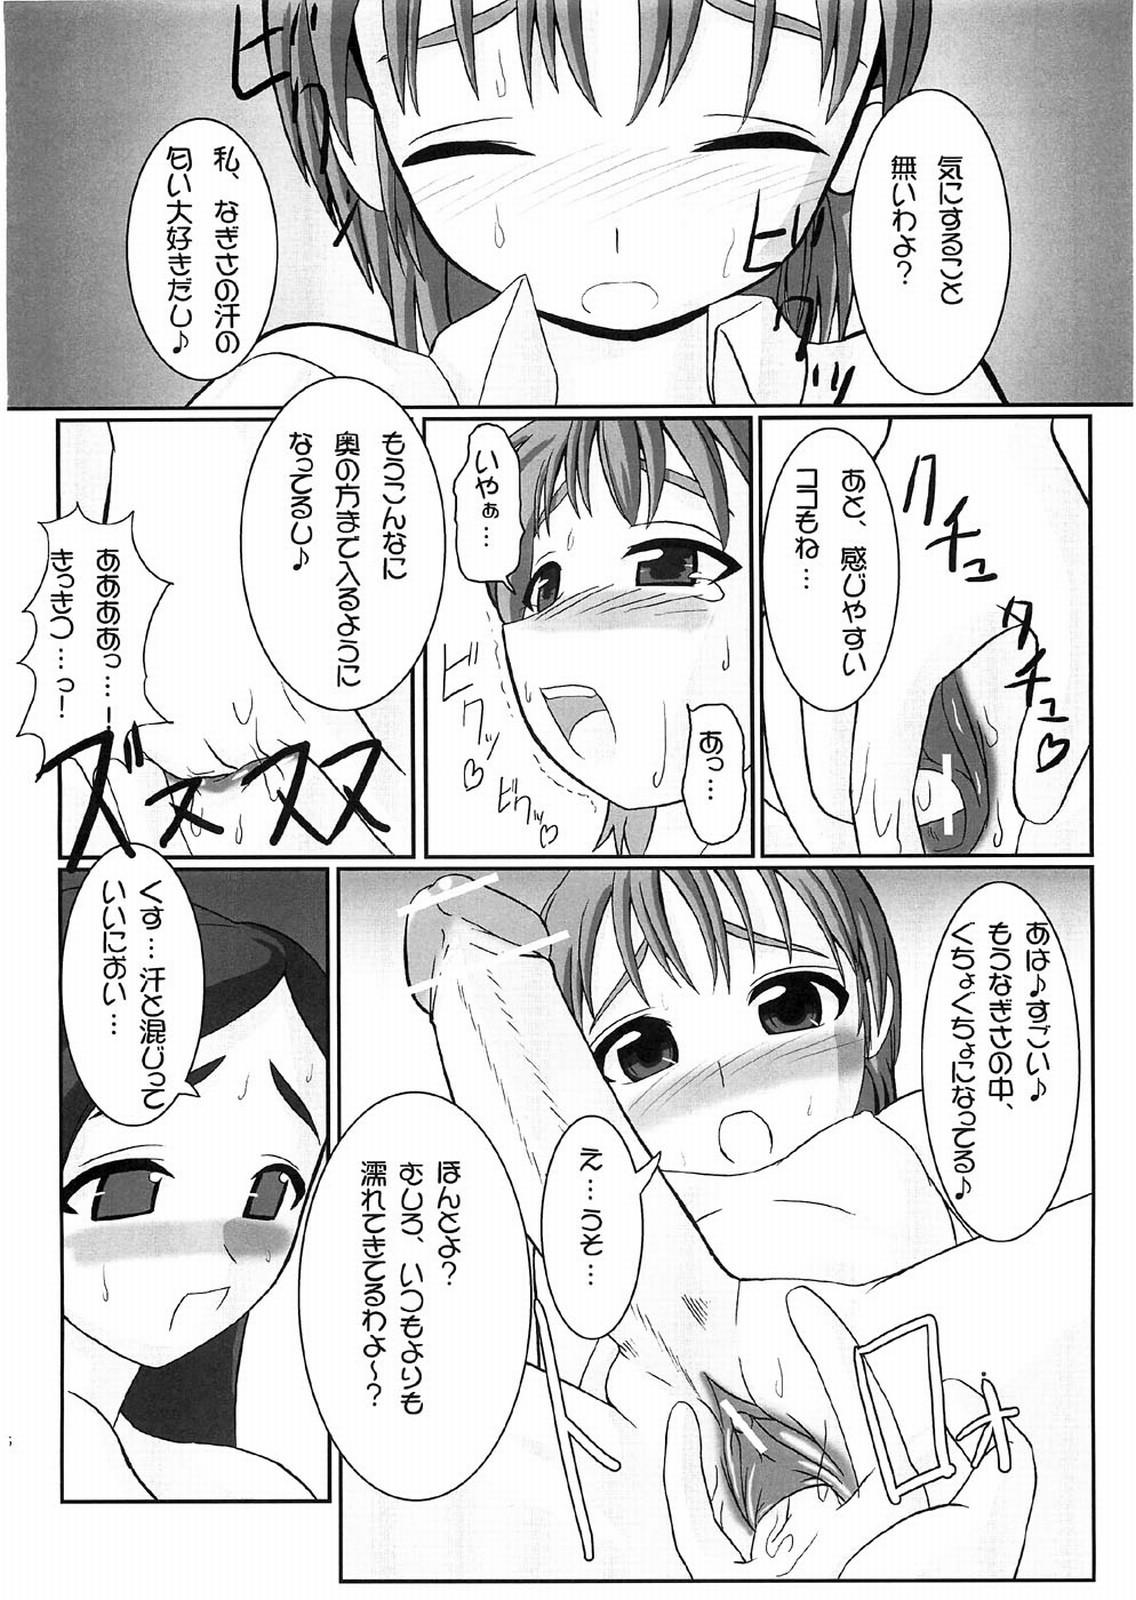 Young Tits Petachin 08 - Pretty cure Huge - Page 5